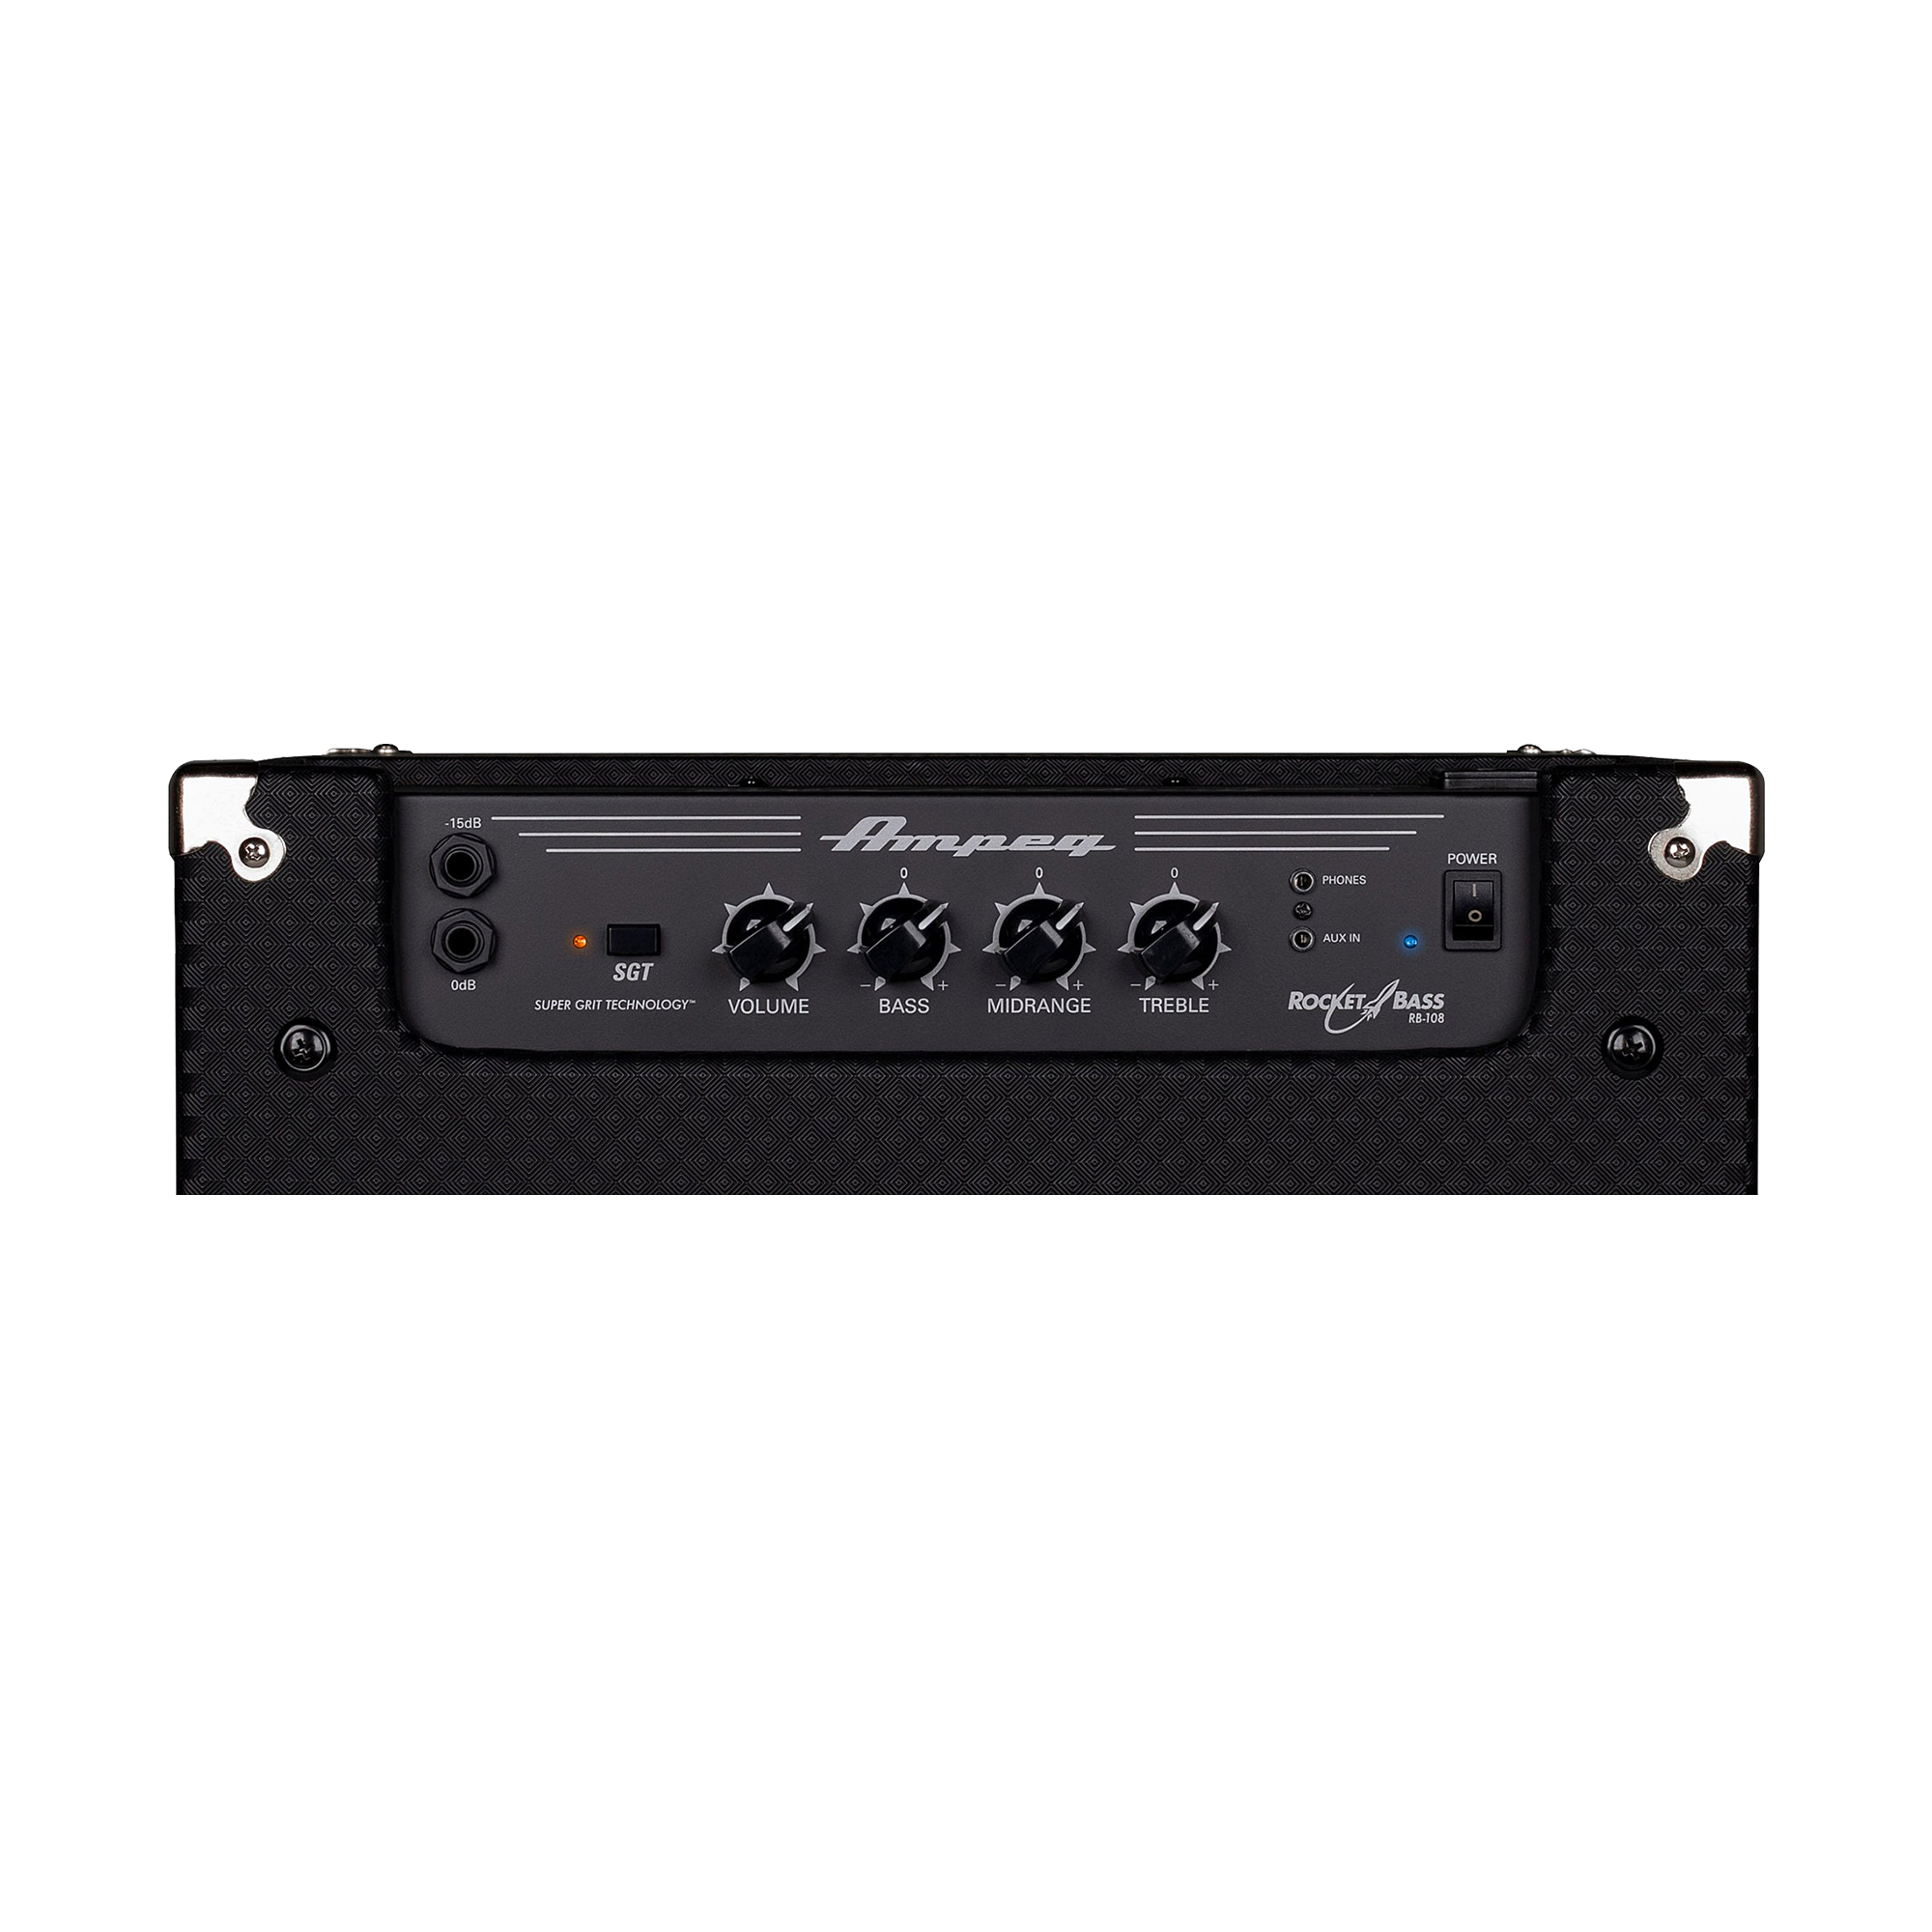 ampeg rb-108 bass combo amp controls view